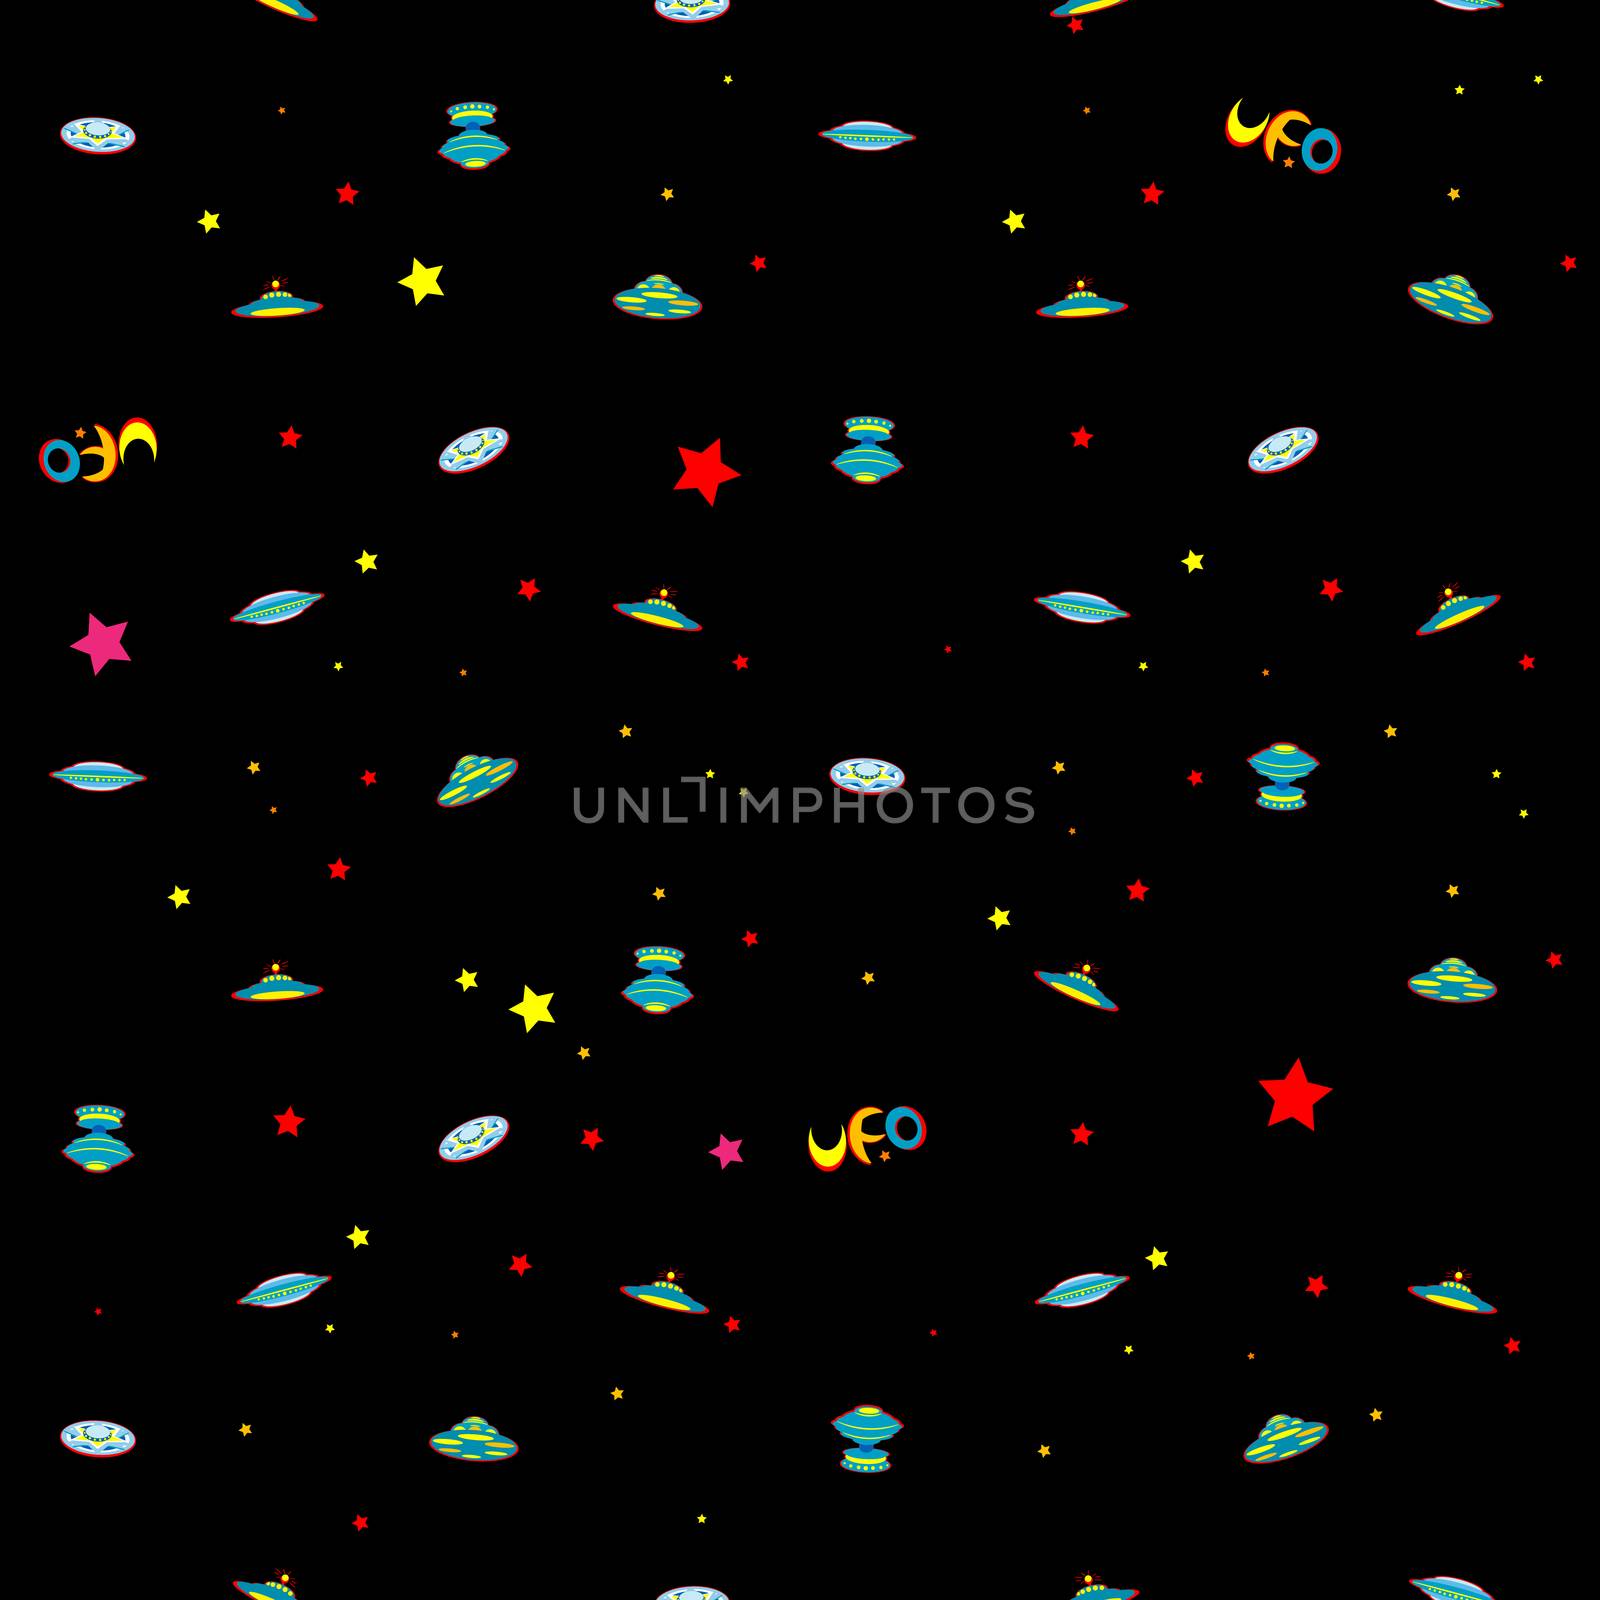 Sparse pattern with different extraterestrial spaceships and text, illustration over a black sky background